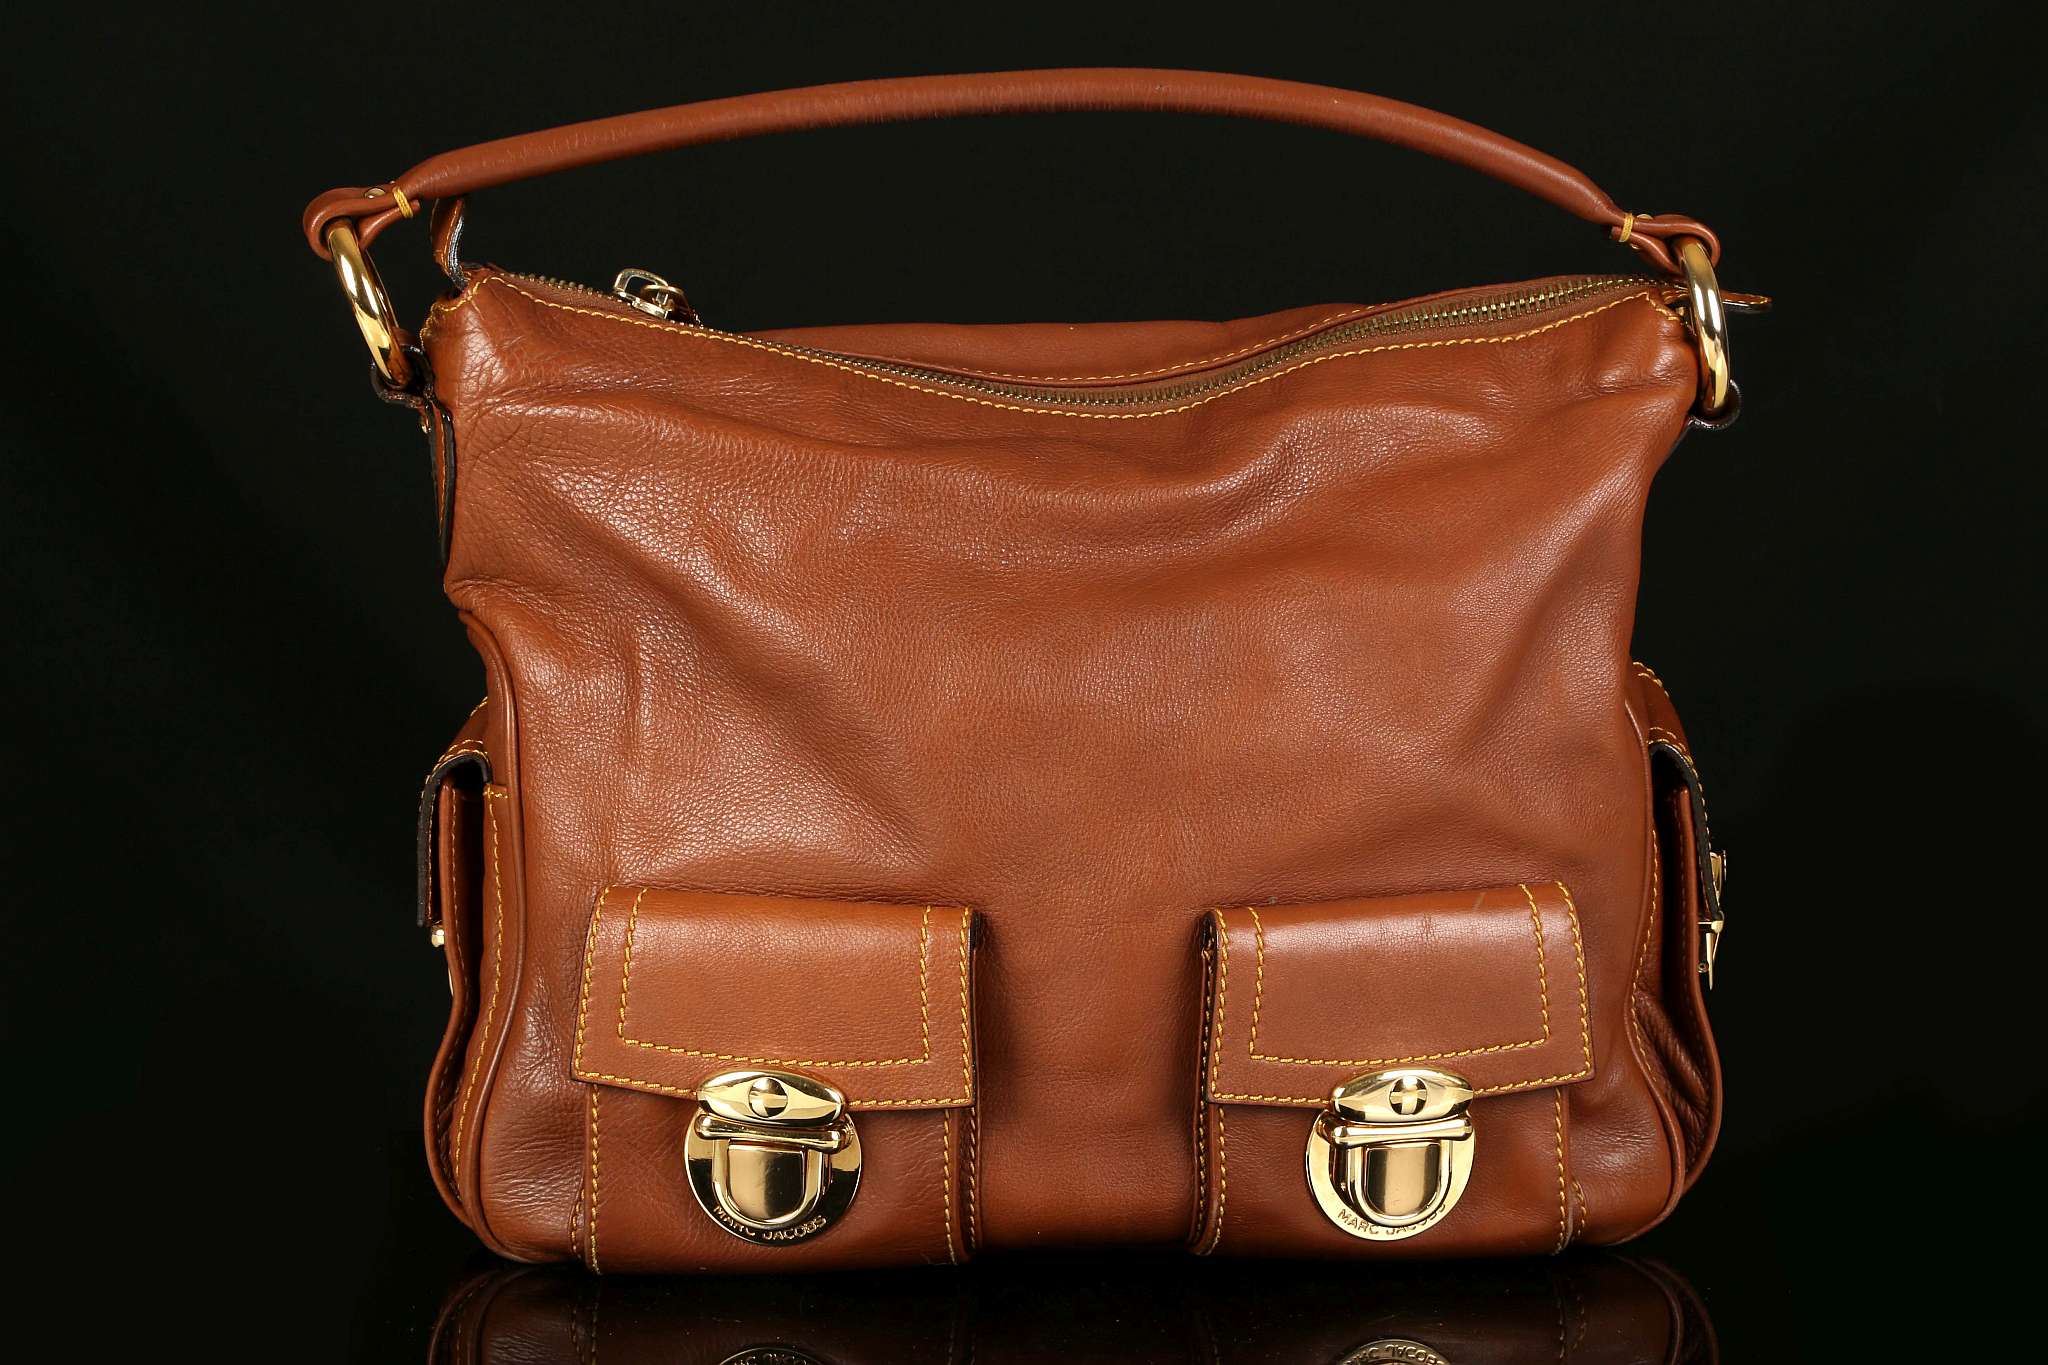 MARC JACOBS BLAKE HOBO BAG, soft brown leather with contrasting stitching, gilt tone hardware,